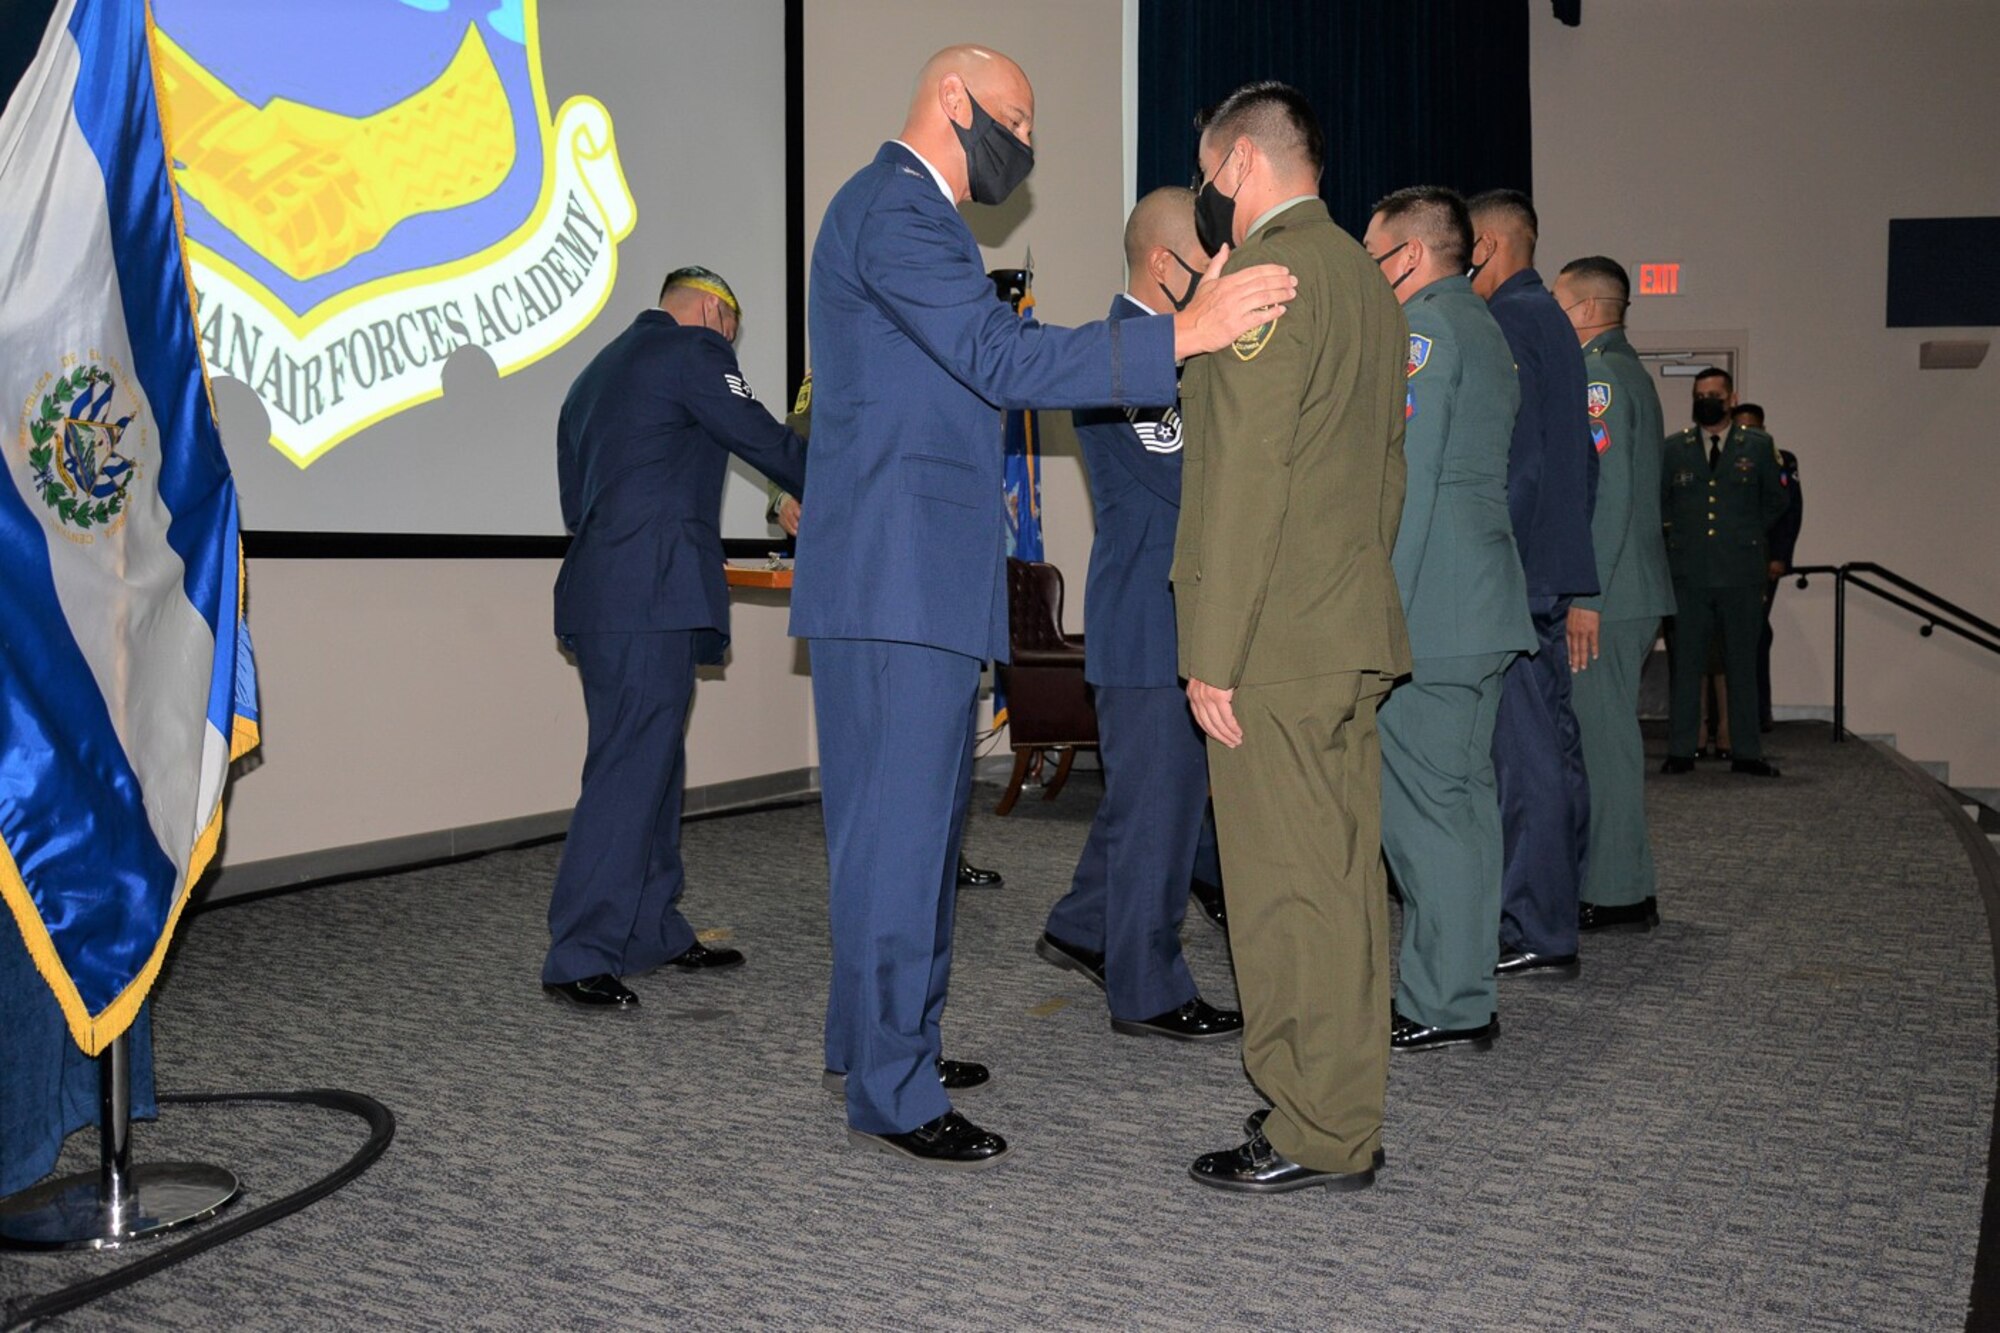 Military members from partner nations are congratulated by IAAFA leadership on stage.